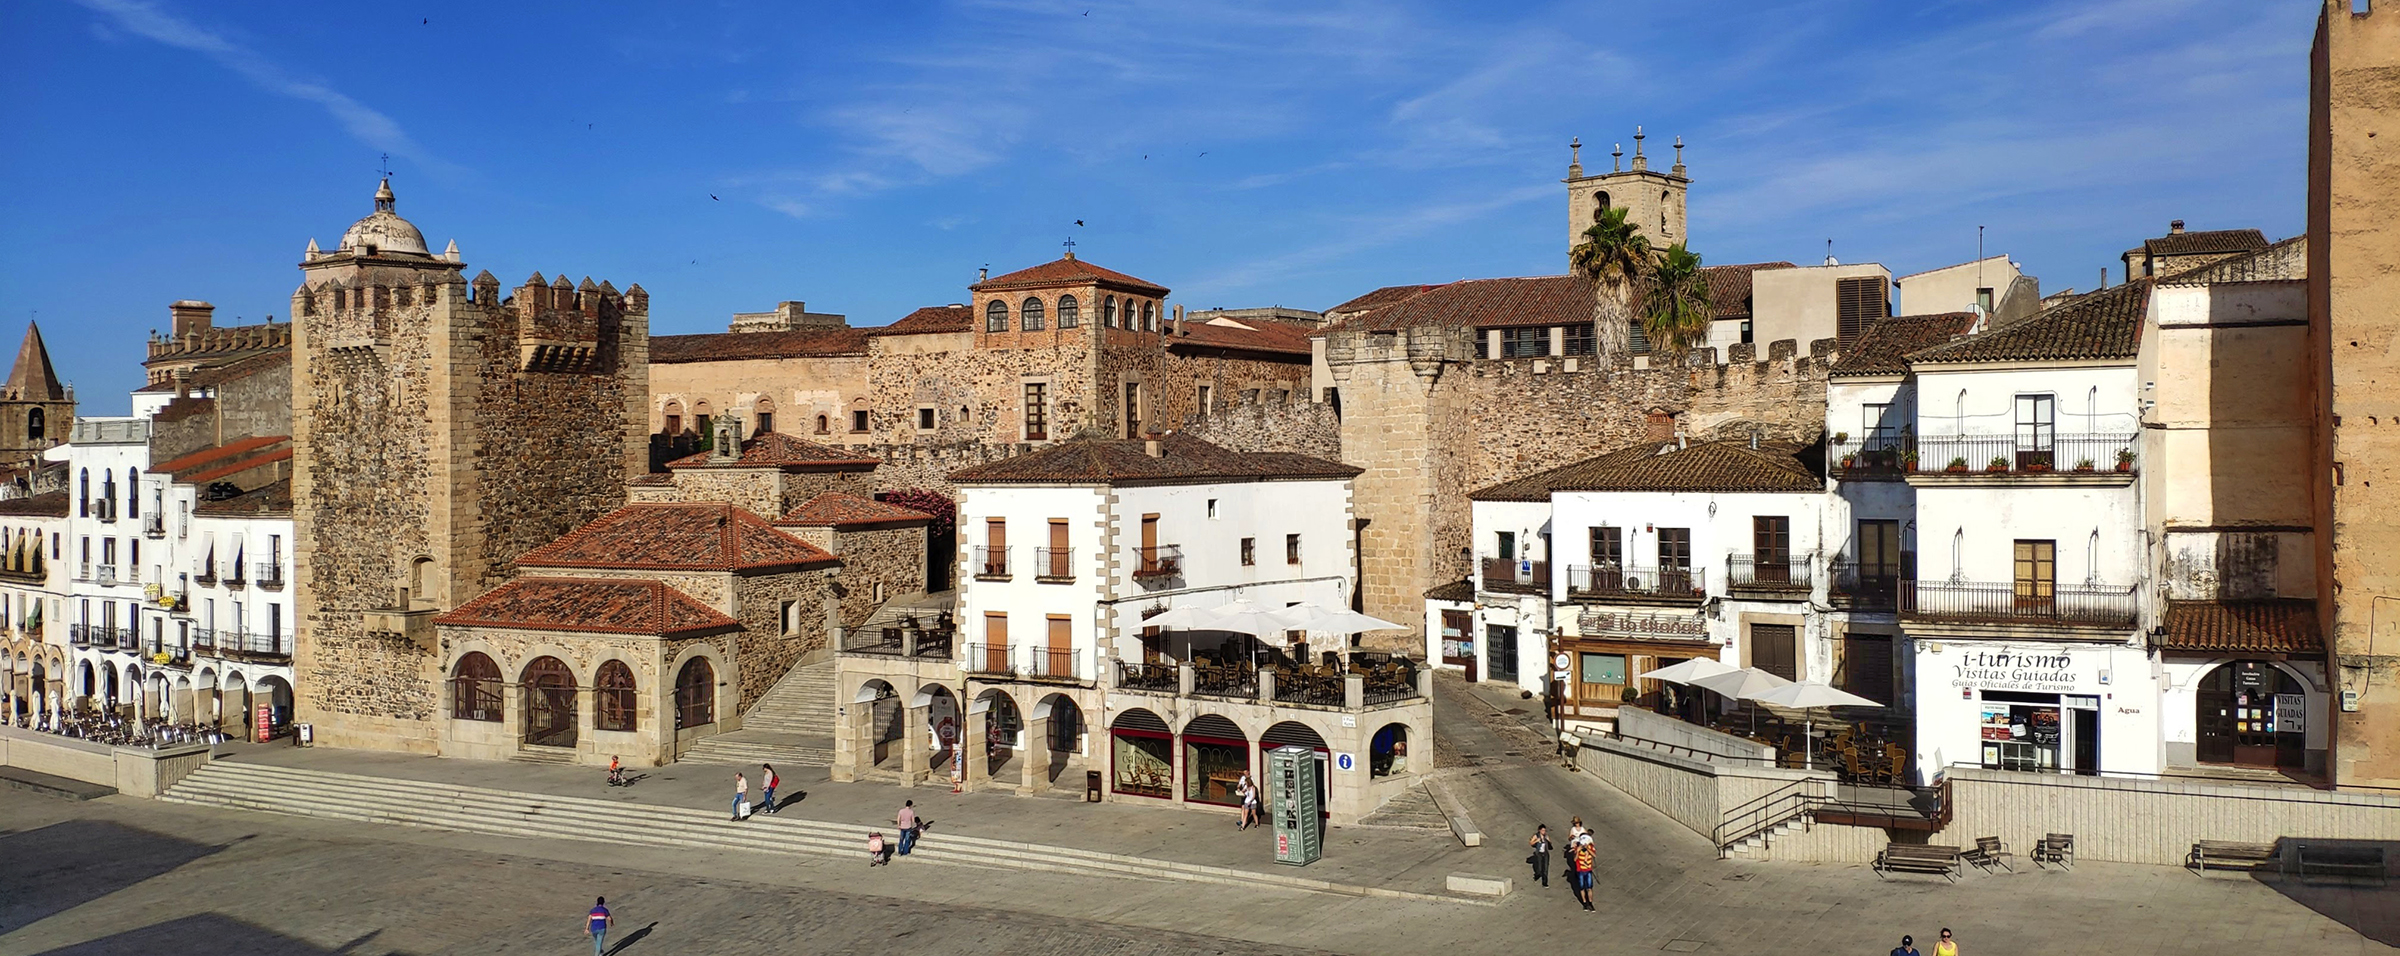 The old town of Cáceres, Extremadura, Spain, in 2019. (PHoto by Alonso de Mendoza/Wikipedia/Creative Commons)